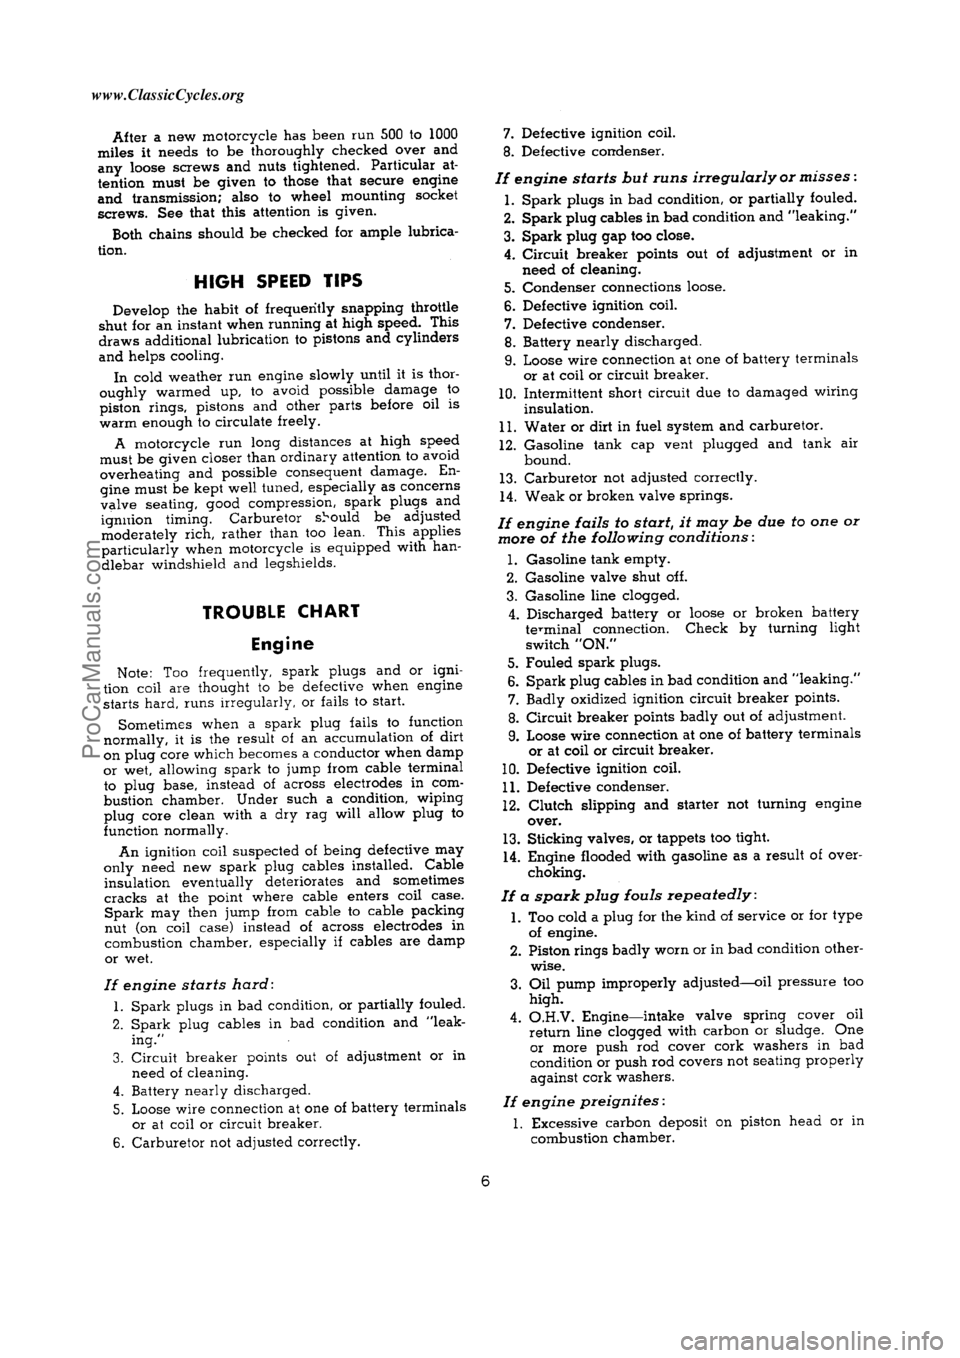 HARLEY-DAVIDSON KNUCKLEHEAD 1940  Service Manual  [6]ProCarManuals.com     www.ClassicCycles.org  